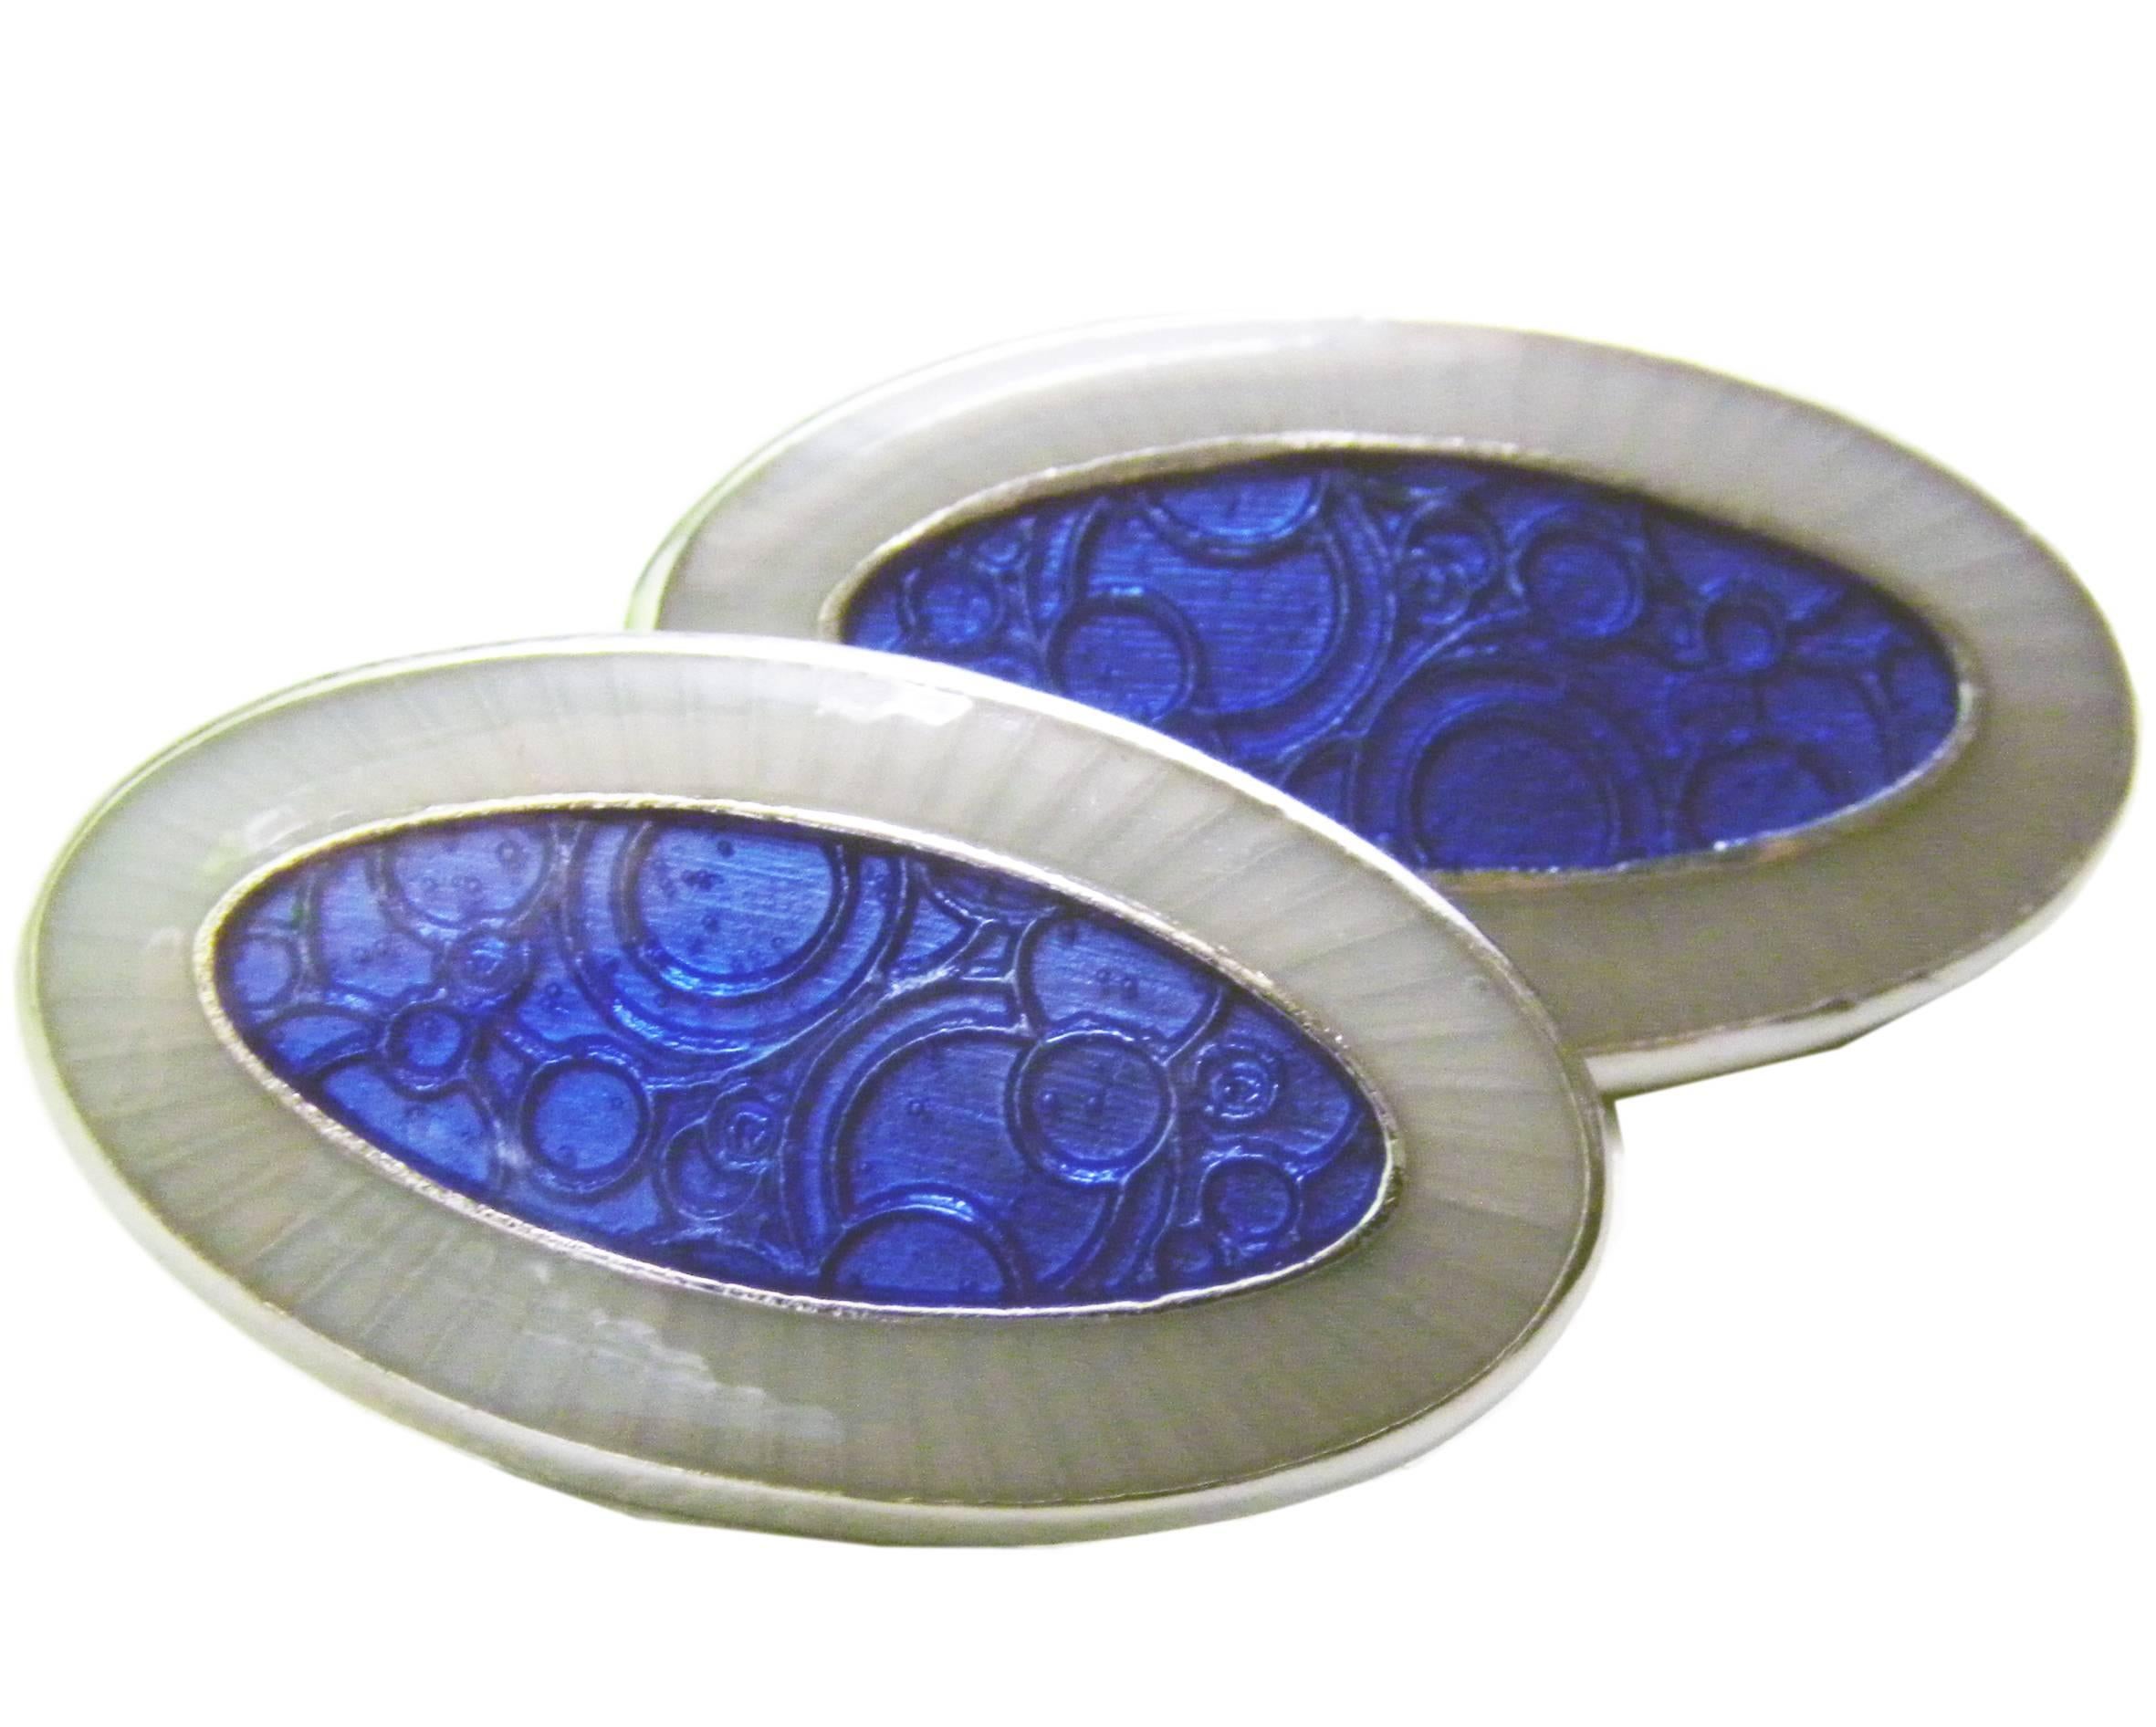 Unique Oval Hand Enamelled blue and light grey sterling silver cufflinks, champlevé technique.
This piece is a limited edition of an 1920s pair of cufflinks found in Berca's archives.

